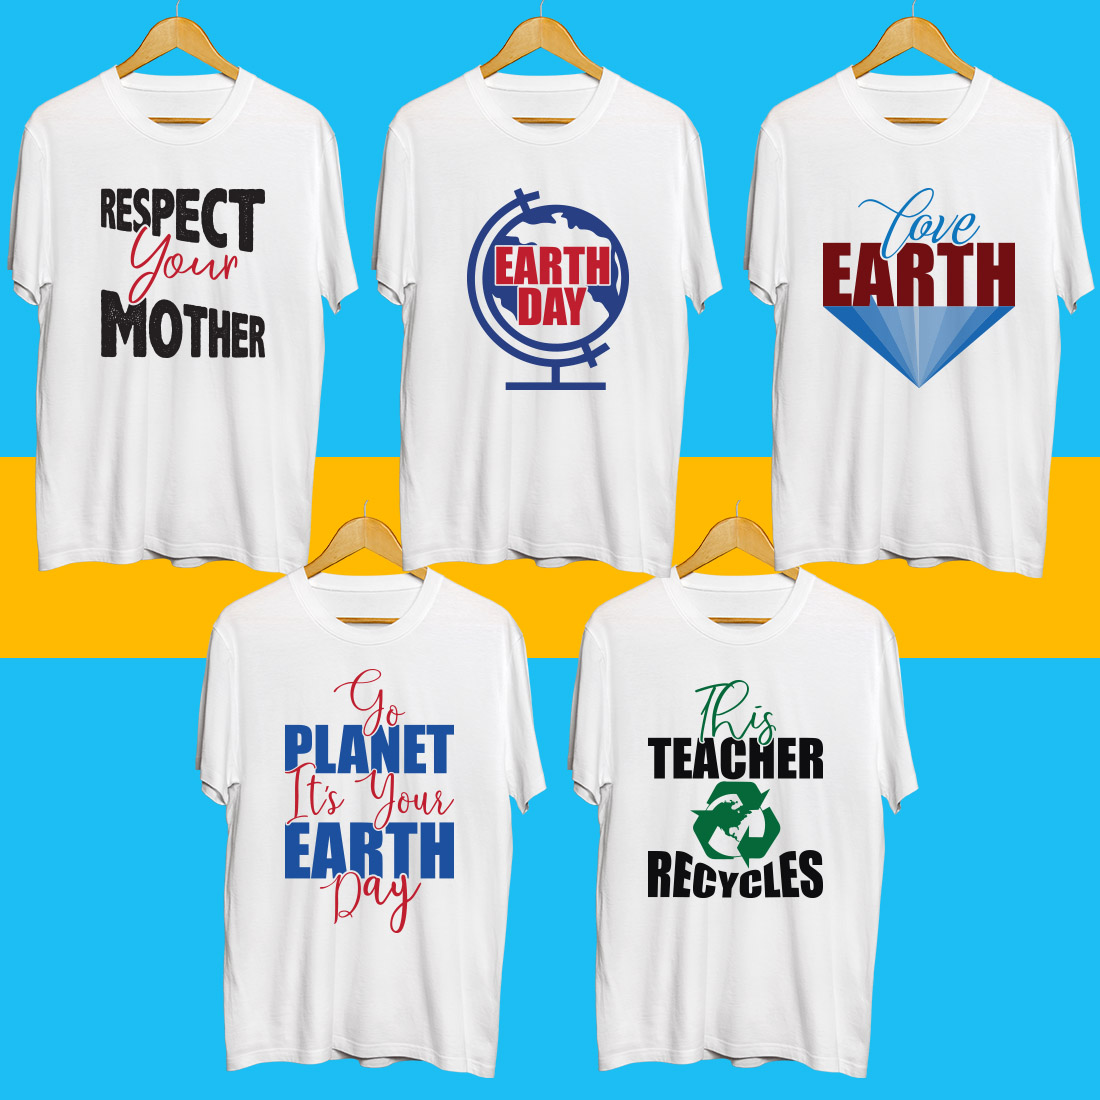 Earth day SVG T Shirt Designs Bundle cover image.